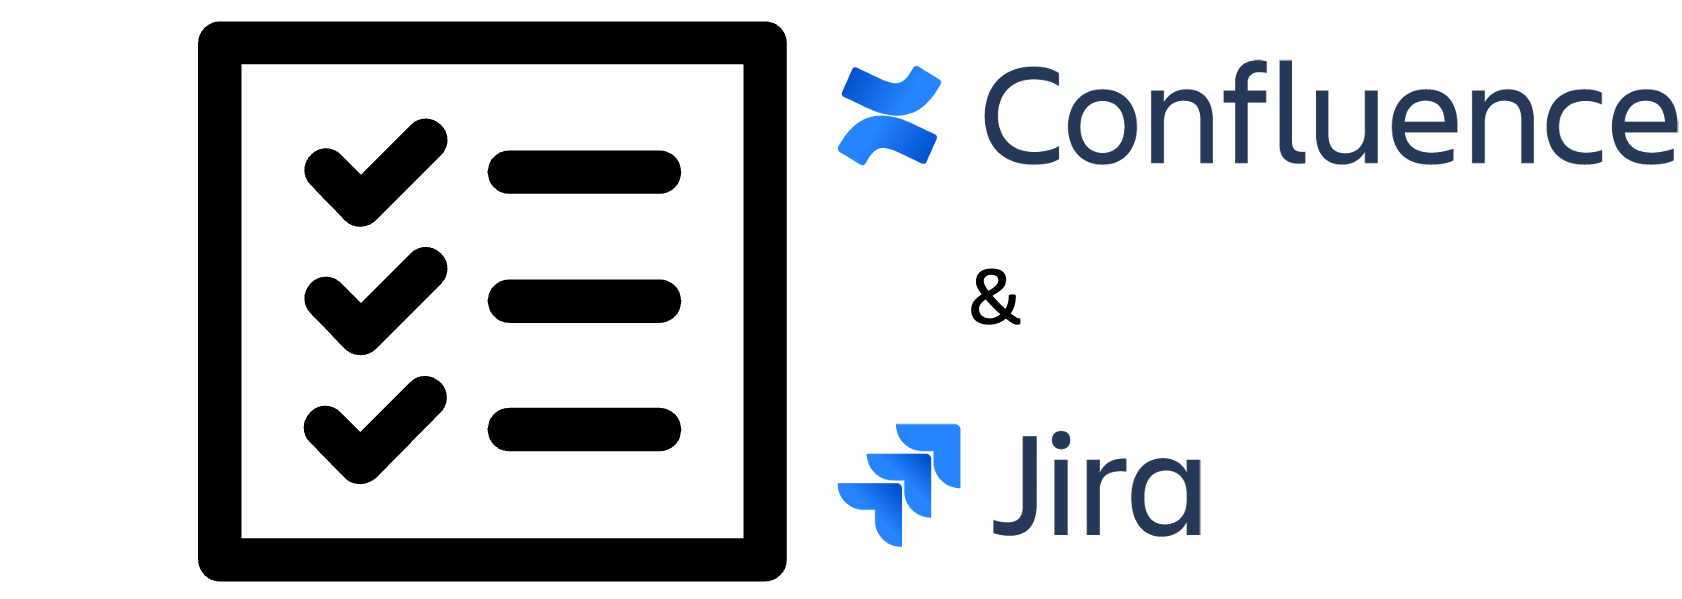 Requirements-Jira-Confluence